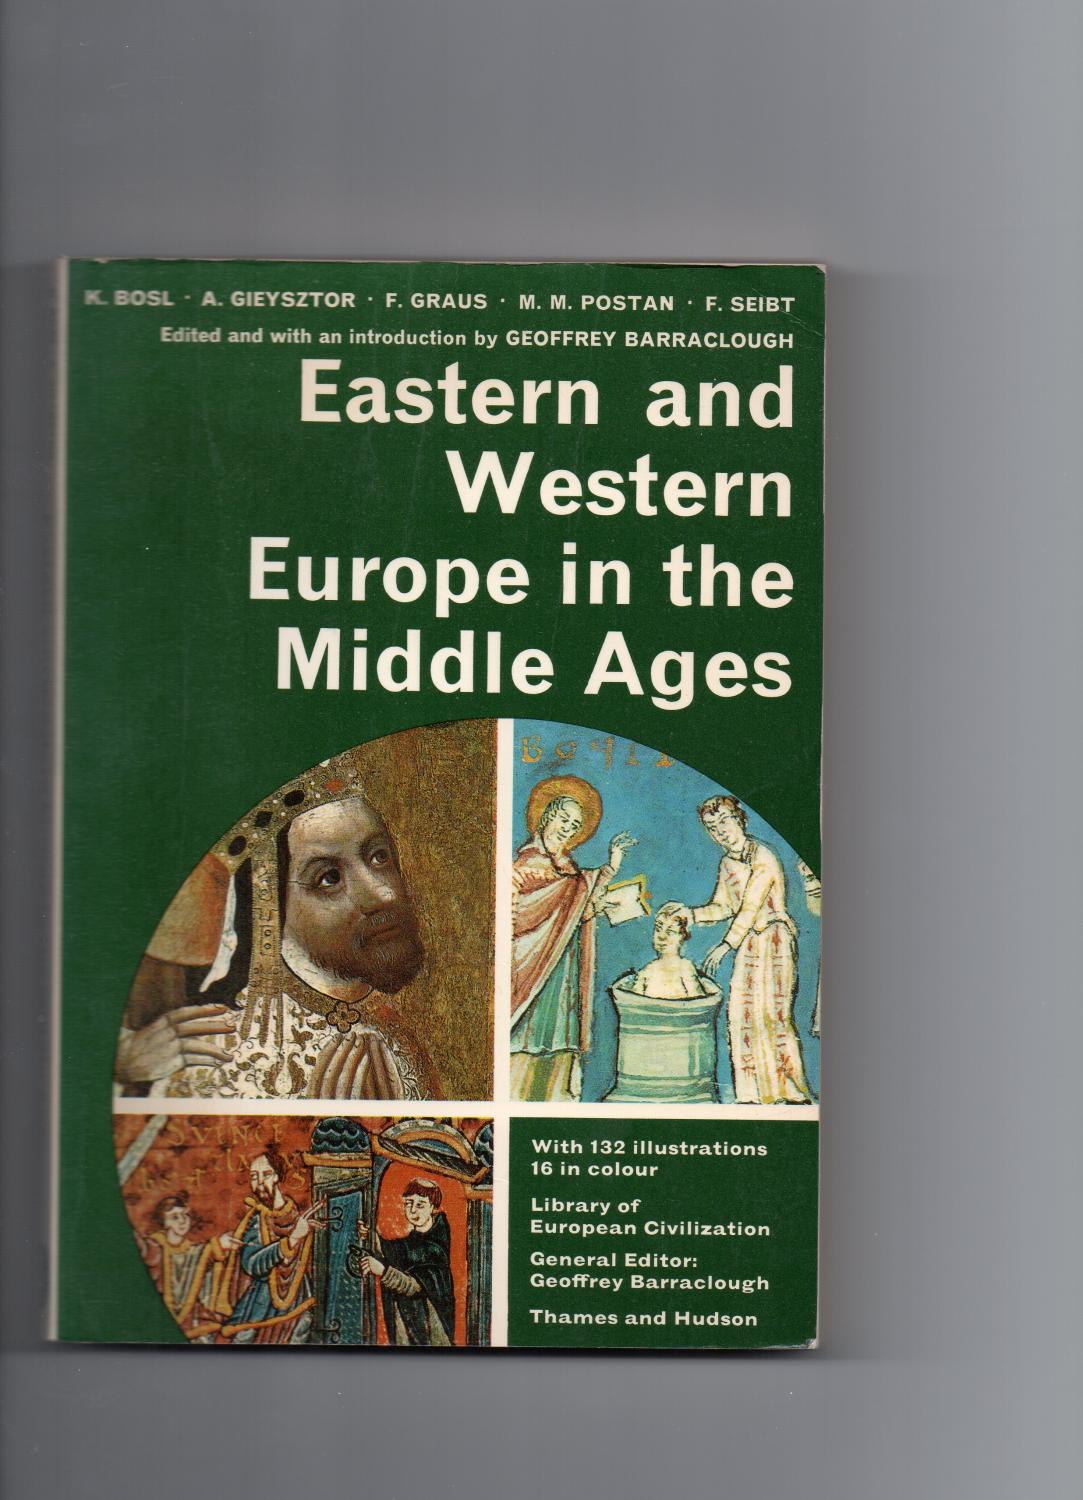 Eastern and Western Europe in the Middle Ages (Library of European Civilization)